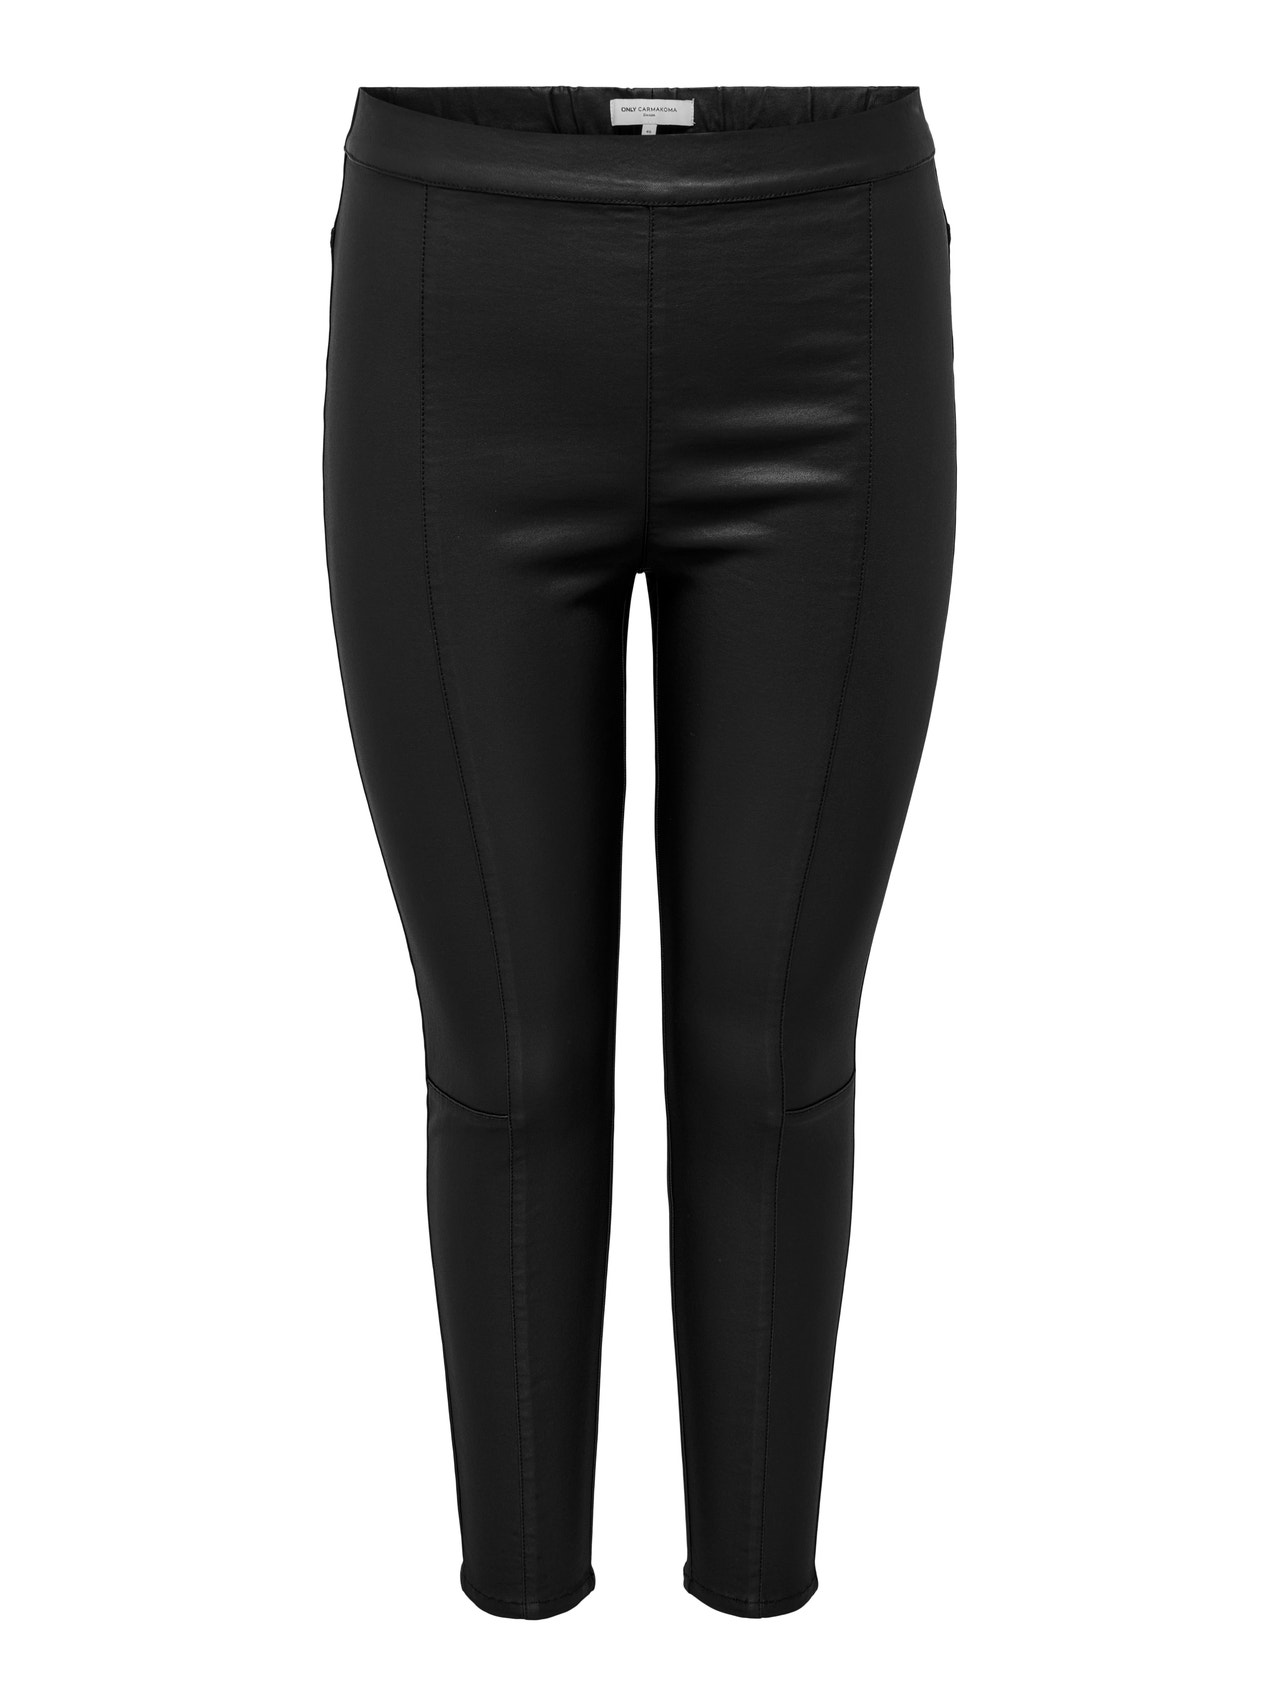 ONLY Jegging Fit High waist Trousers -Black - 15290962